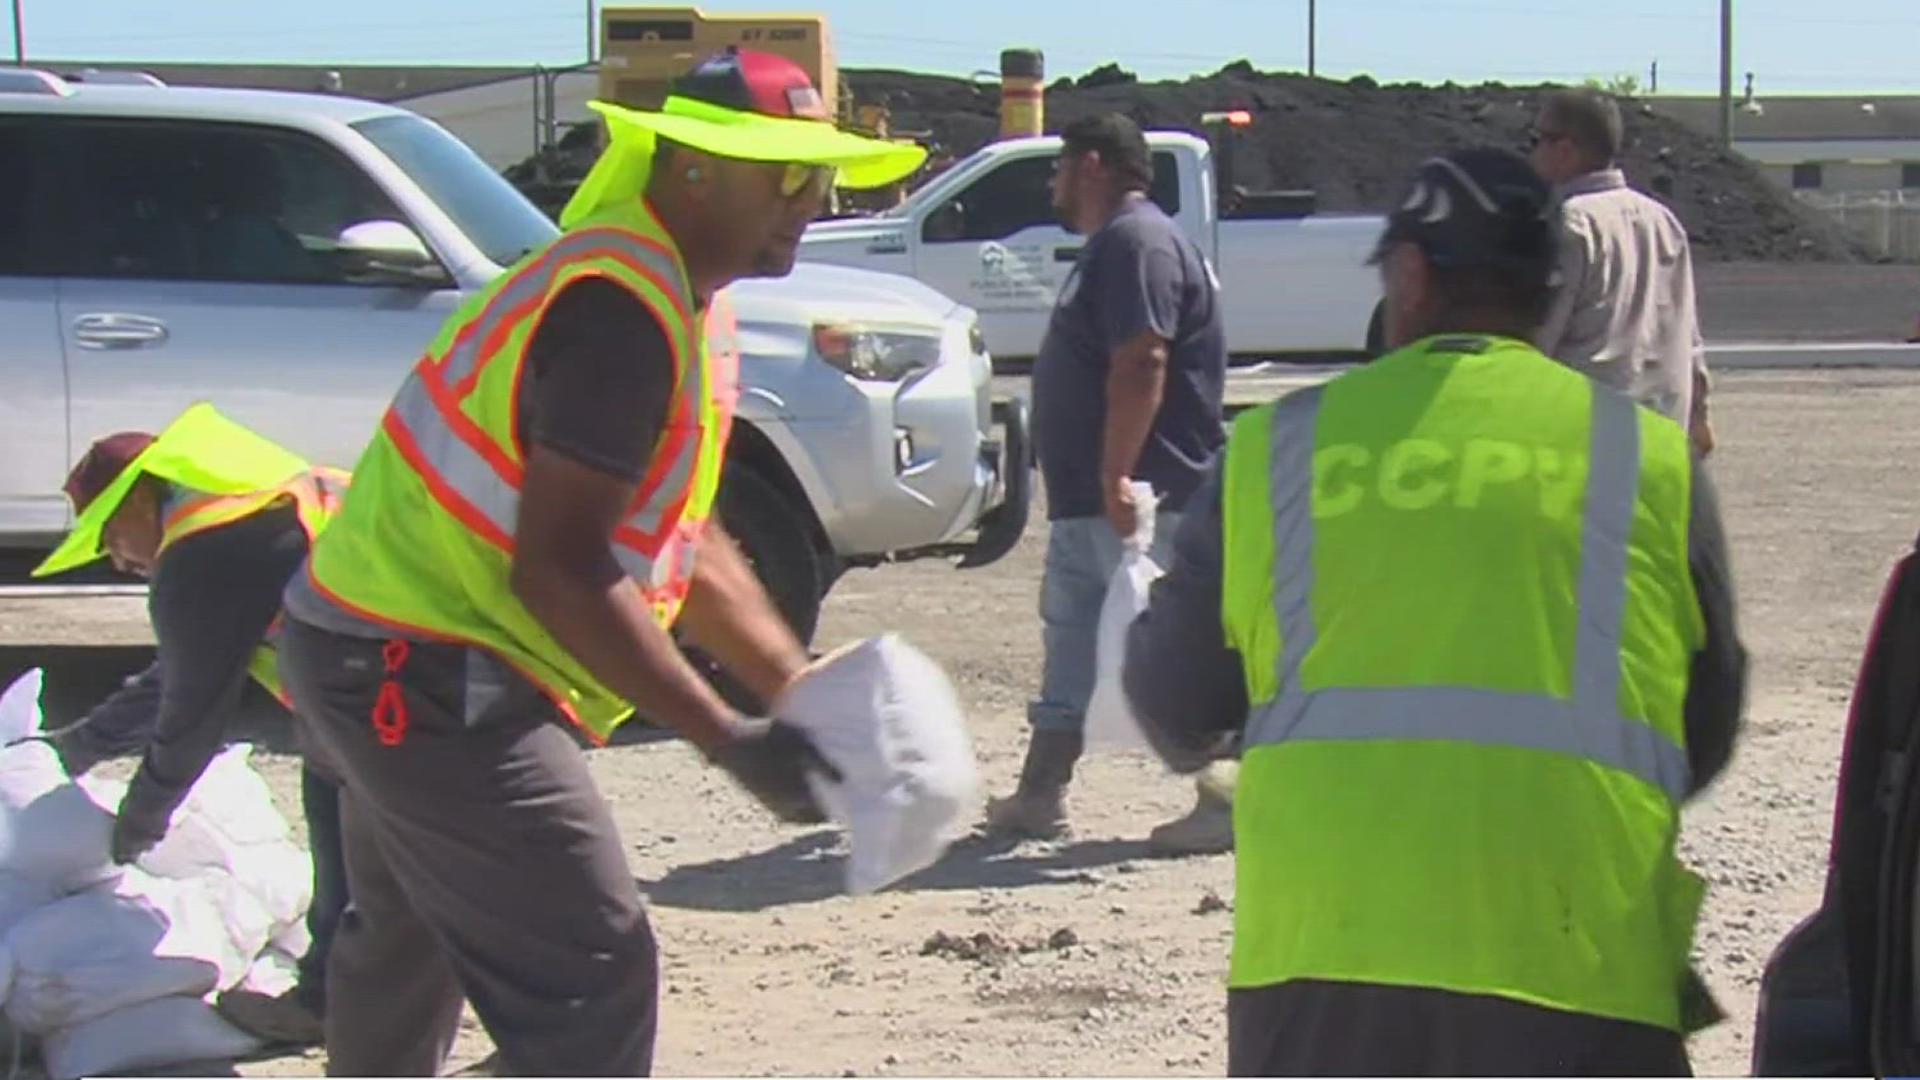 More than 14,000 sandbags were filled to be distributed to residents this week. Each vehicle is given seven sandbags.